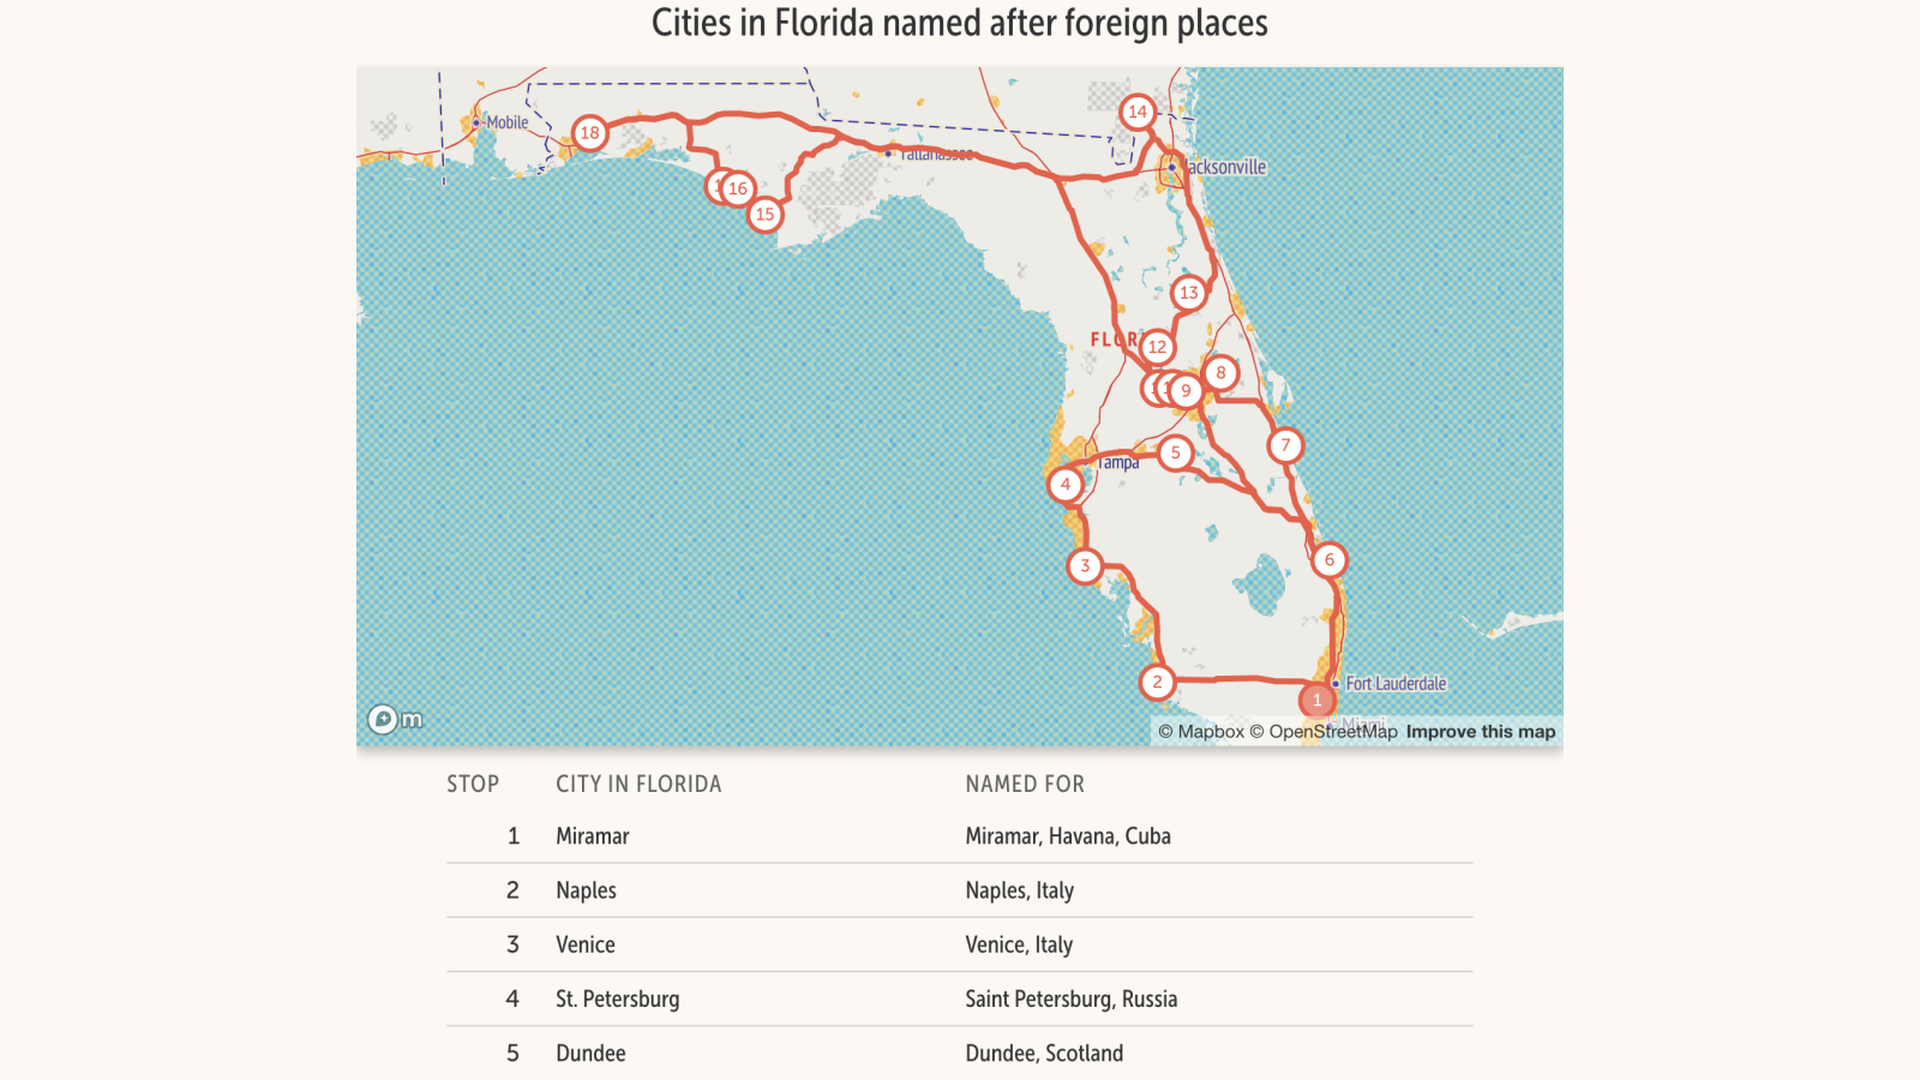 A map of cities in Florida named after foreign places.